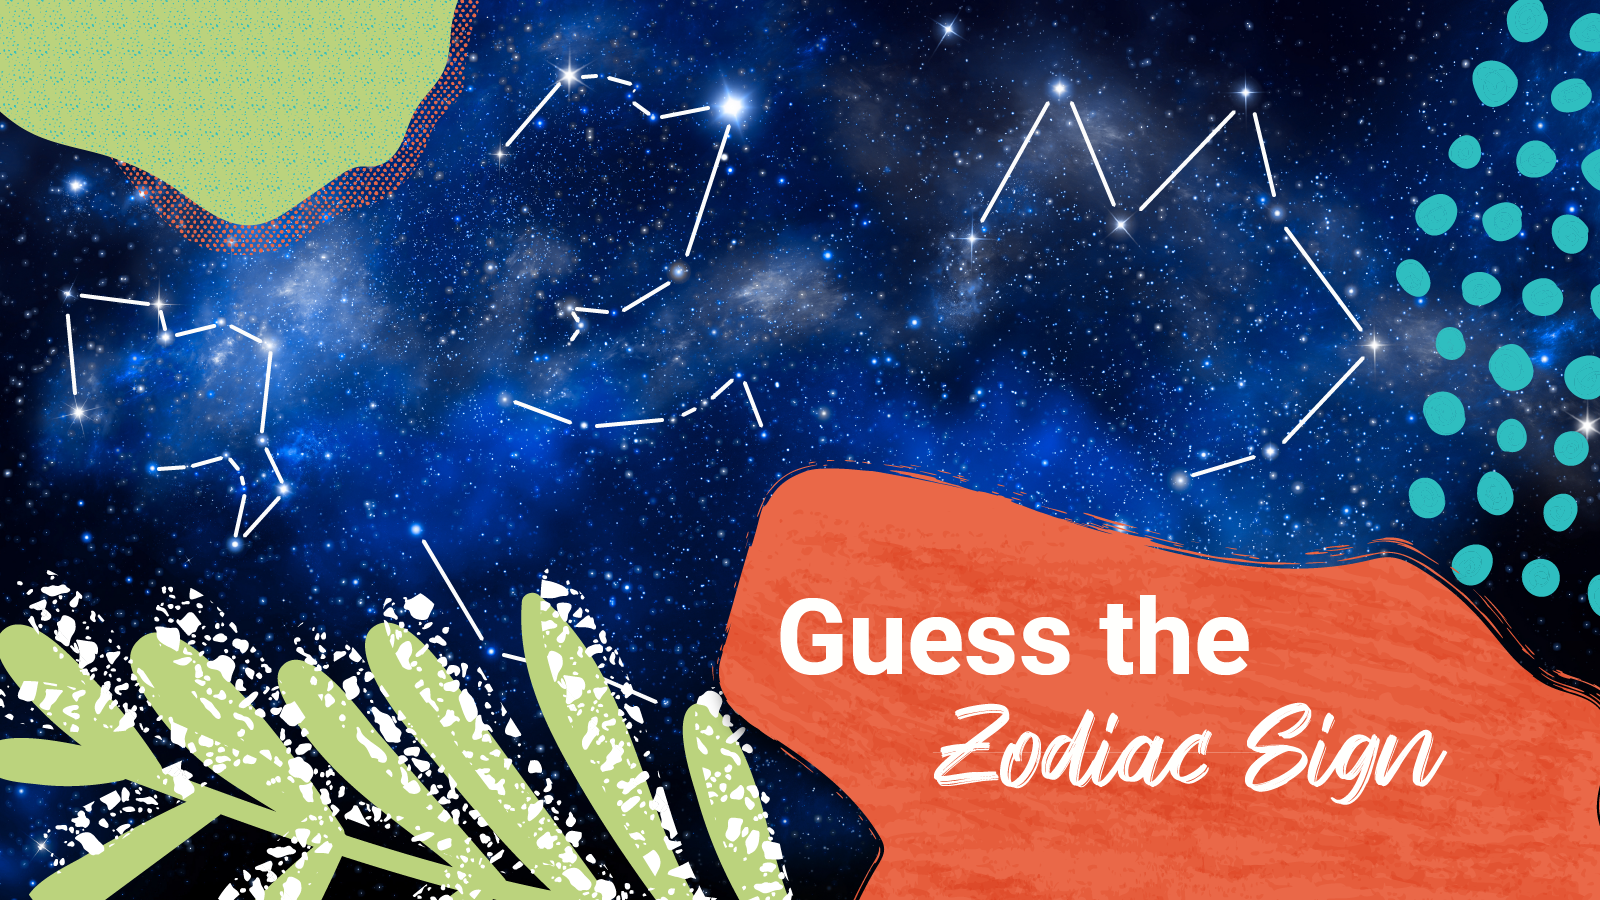 Constellations outlined in the night sky with the words "Guess the Zodiac Sign"